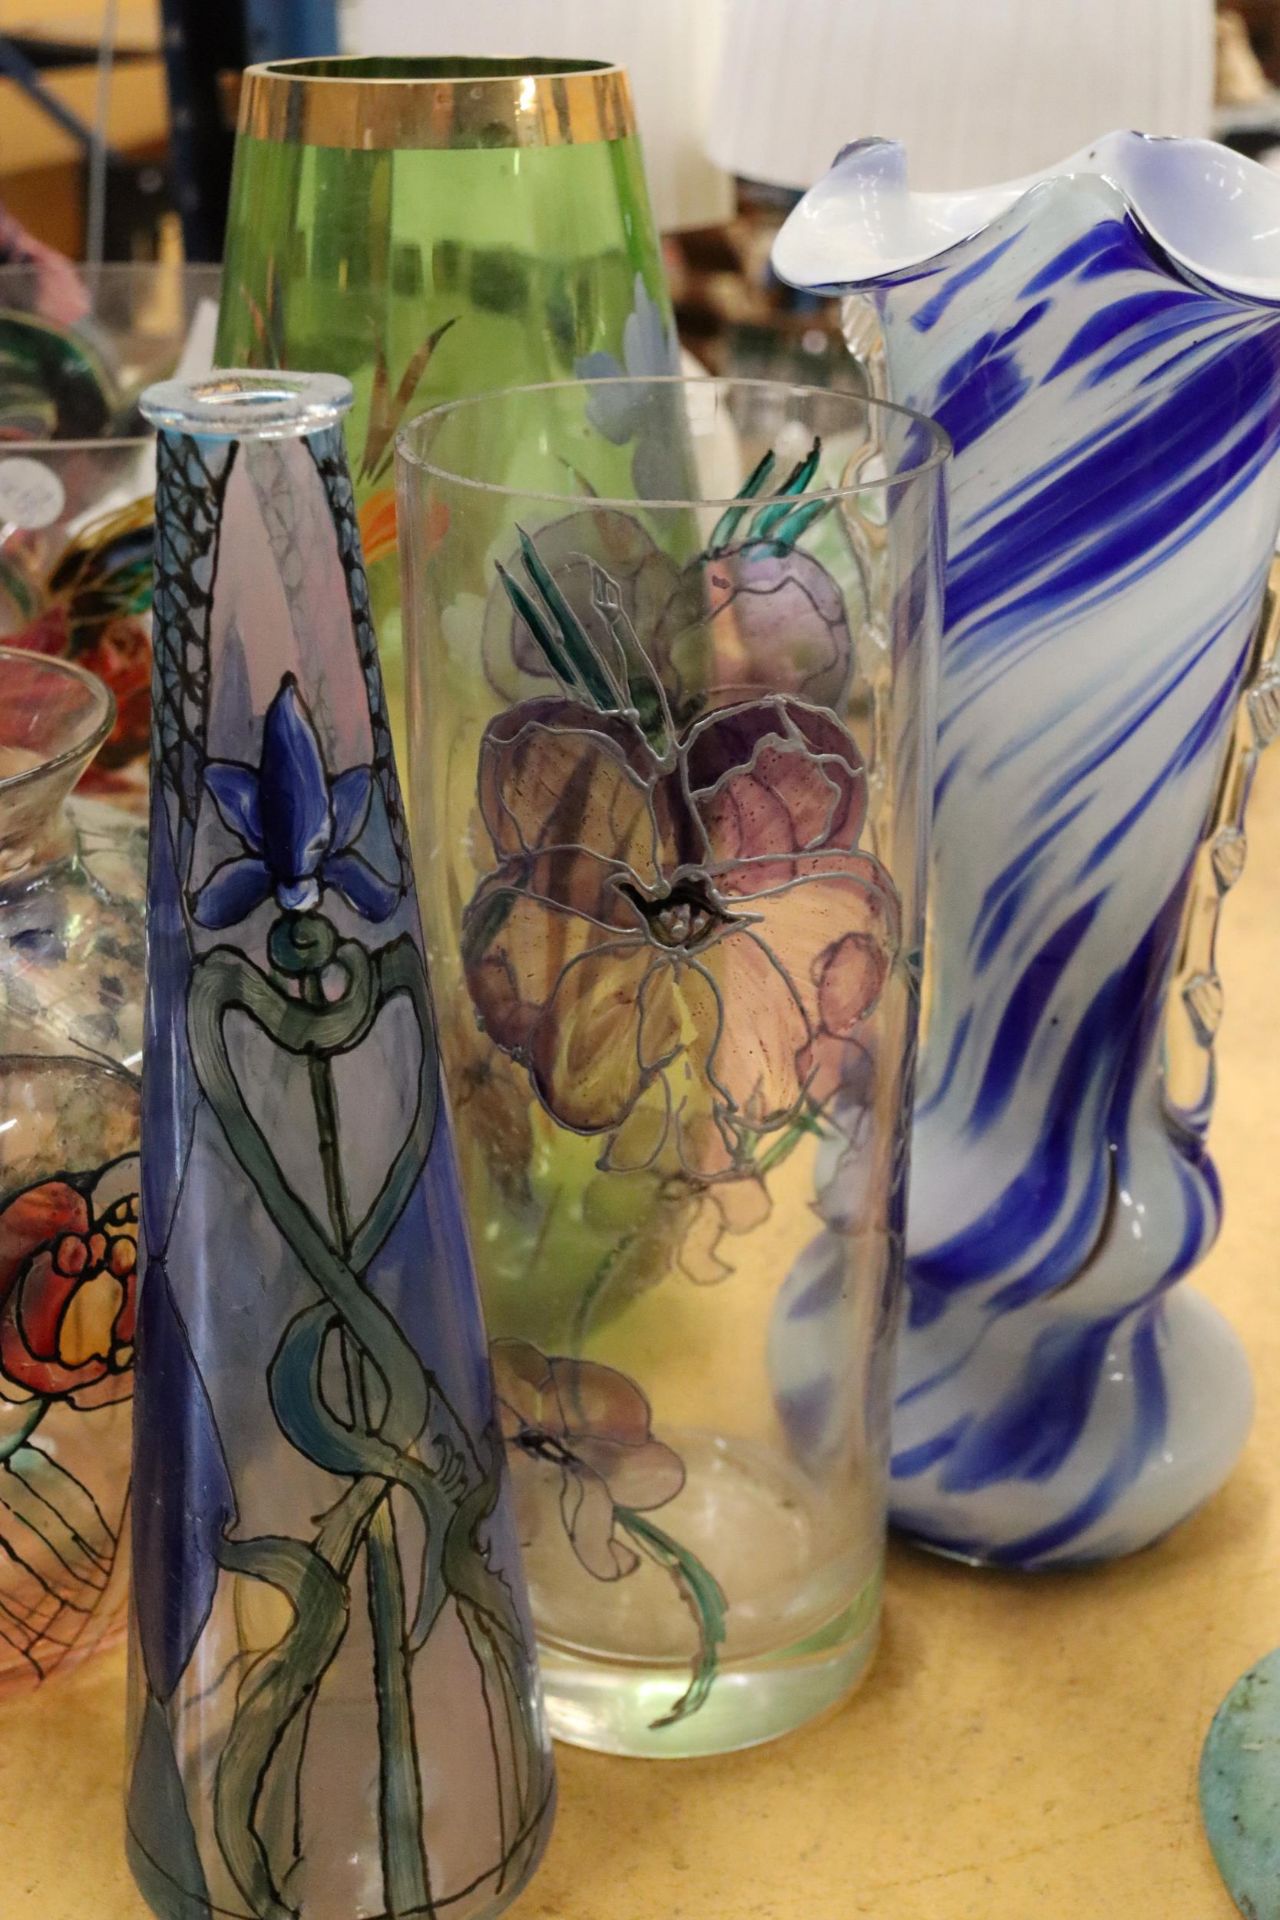 A LARGE MIXED LOT OF PAINTED ON GLASS VASES PLUS ONE DELCROFT WARE CERAMIC VASE - Bild 5 aus 11